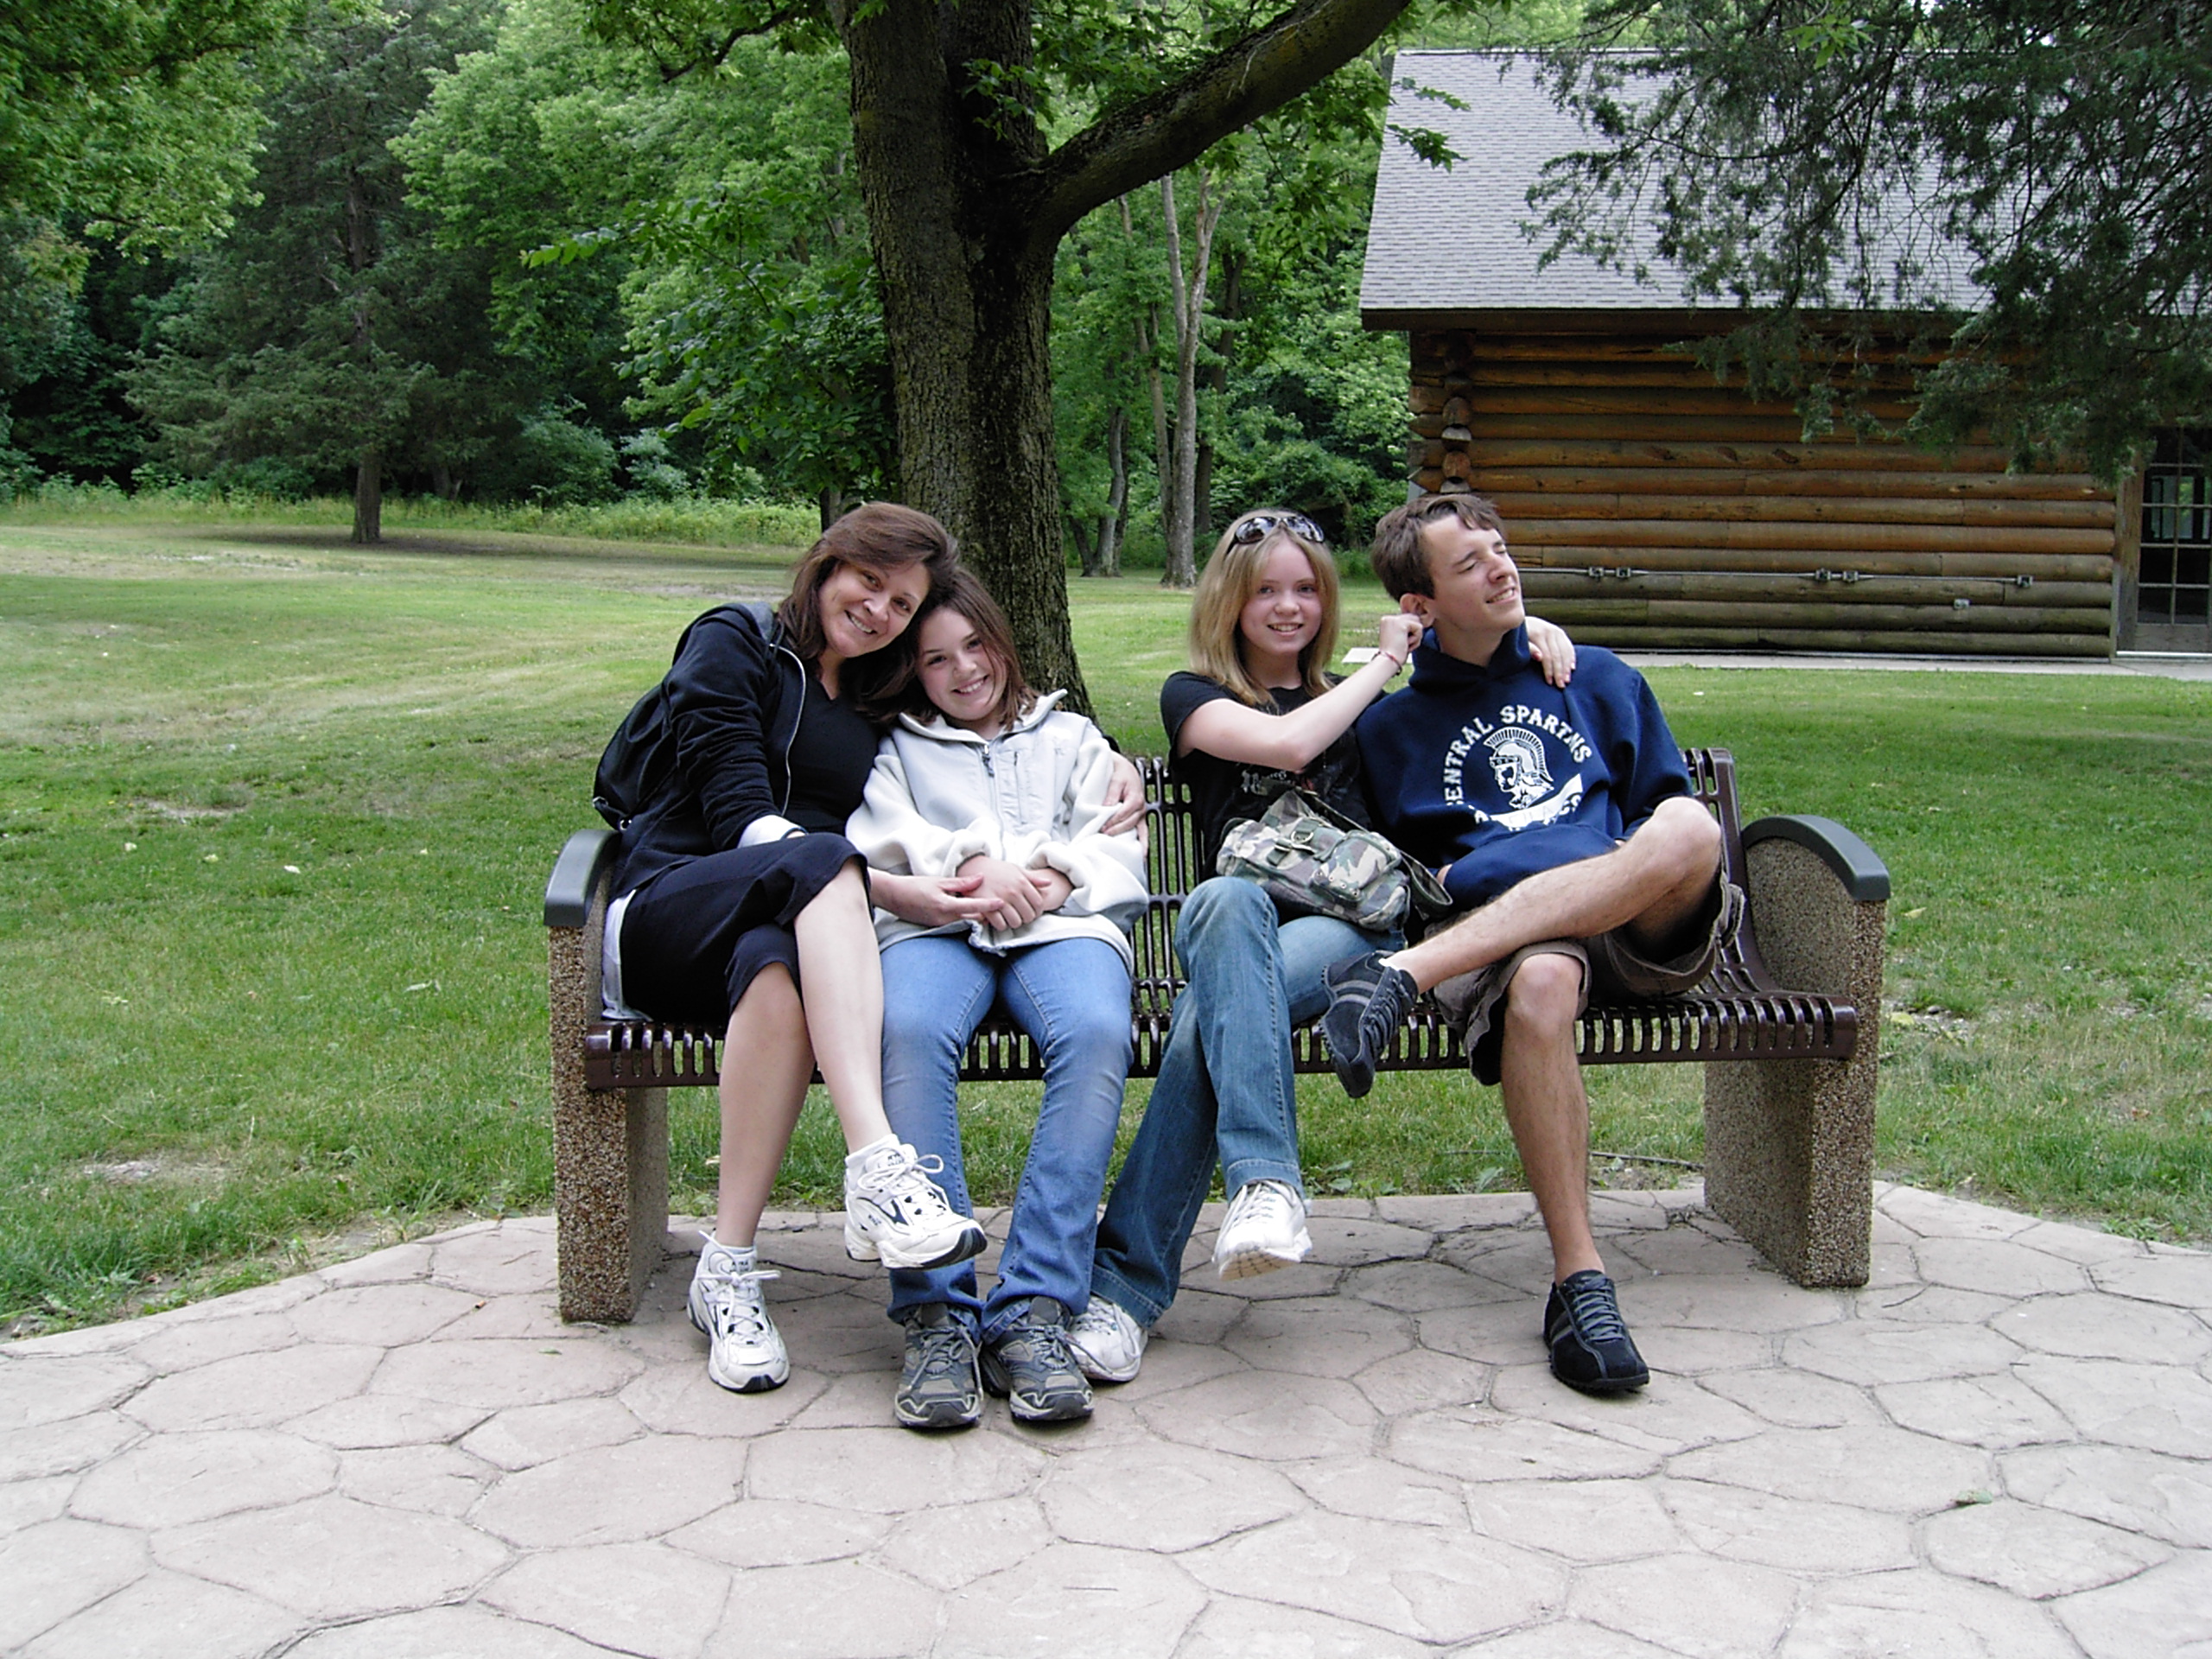 Me with my rascals - 2006